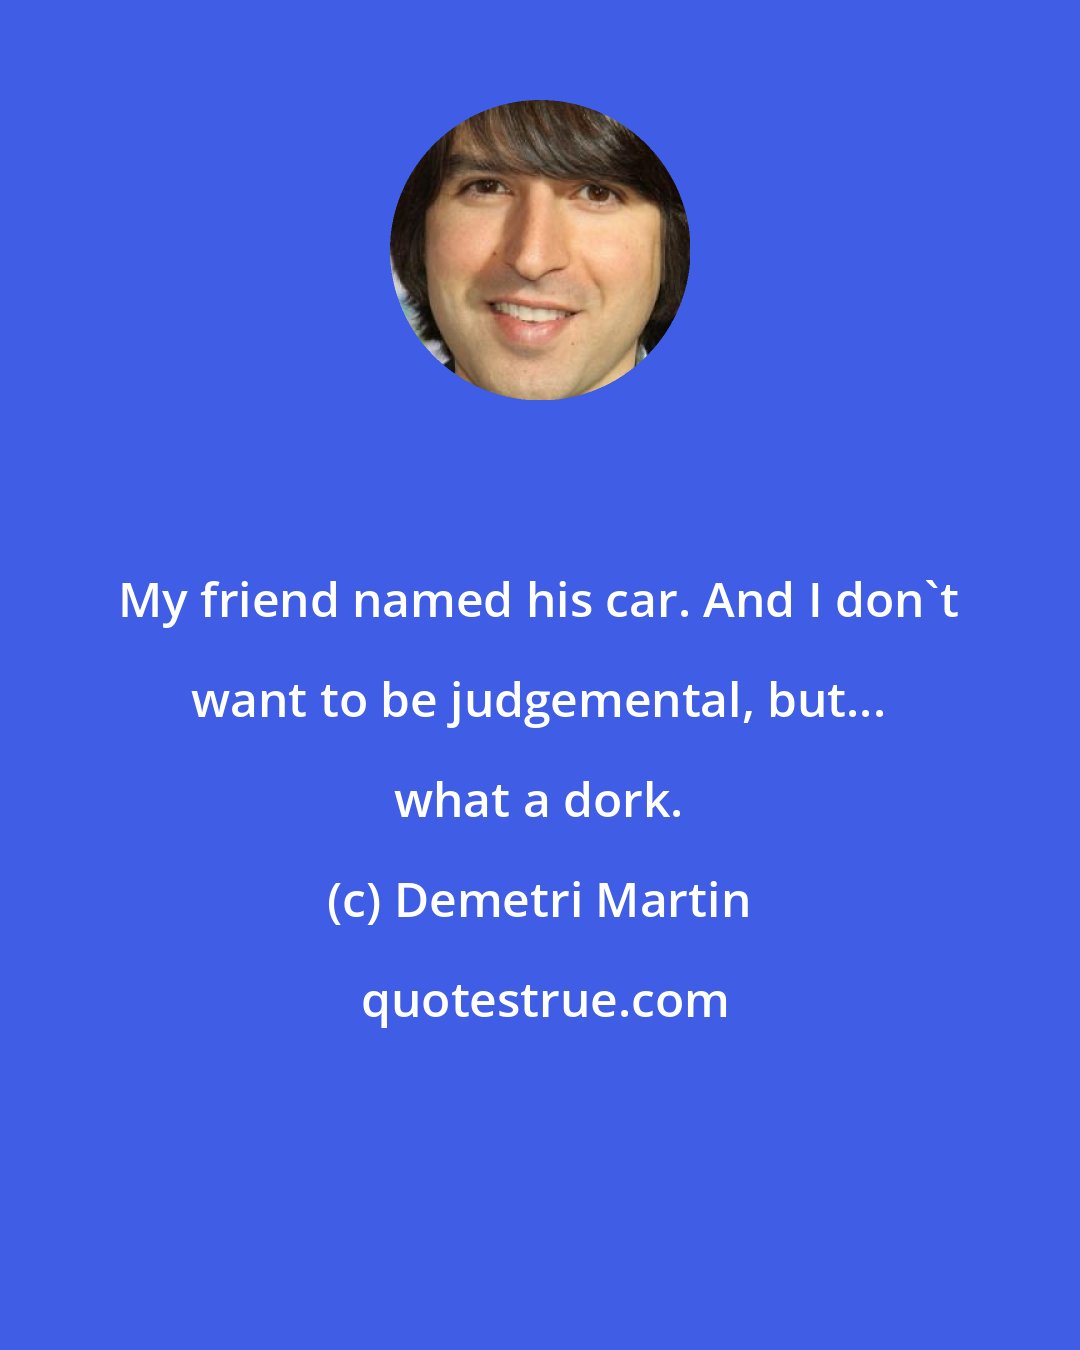 Demetri Martin: My friend named his car. And I don't want to be judgemental, but... what a dork.